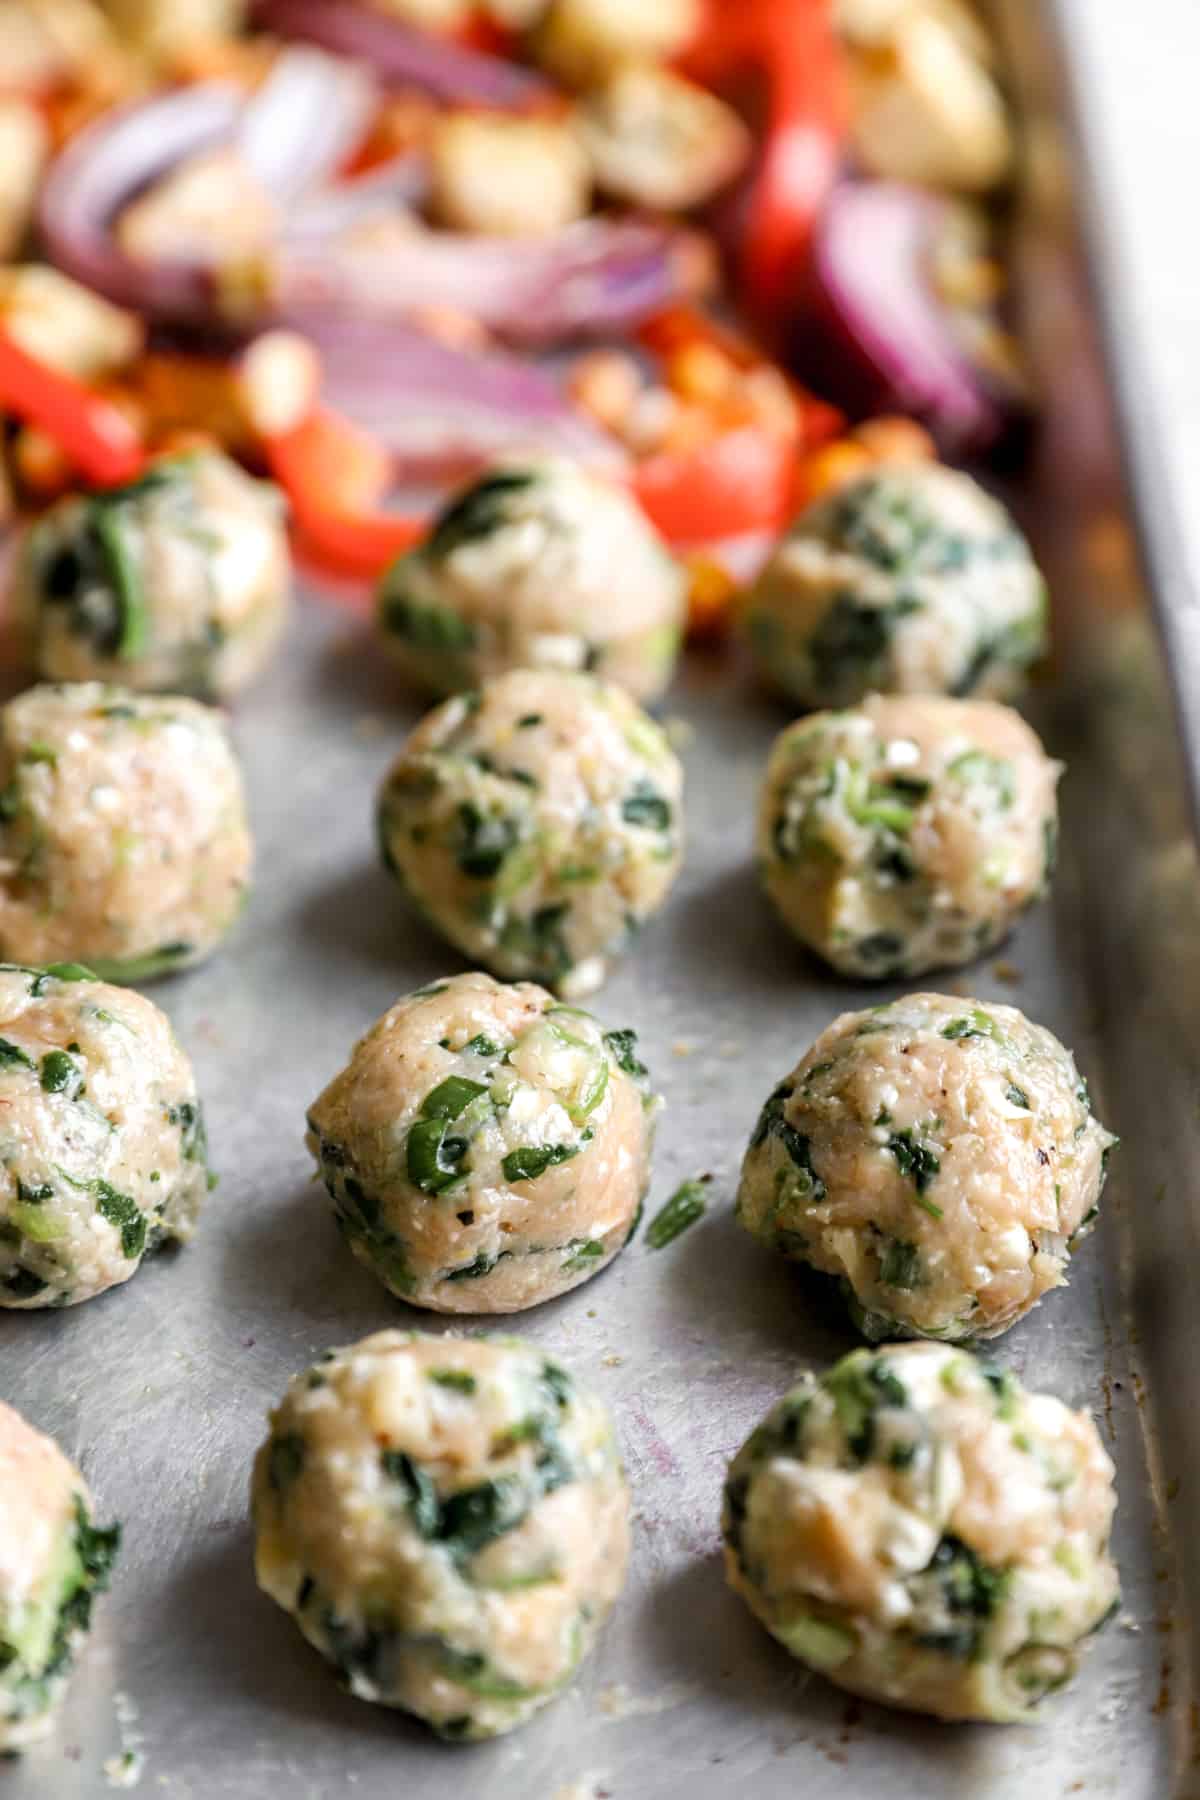 unbaked chicken meatballs on a baking sheet with veggies from the side.